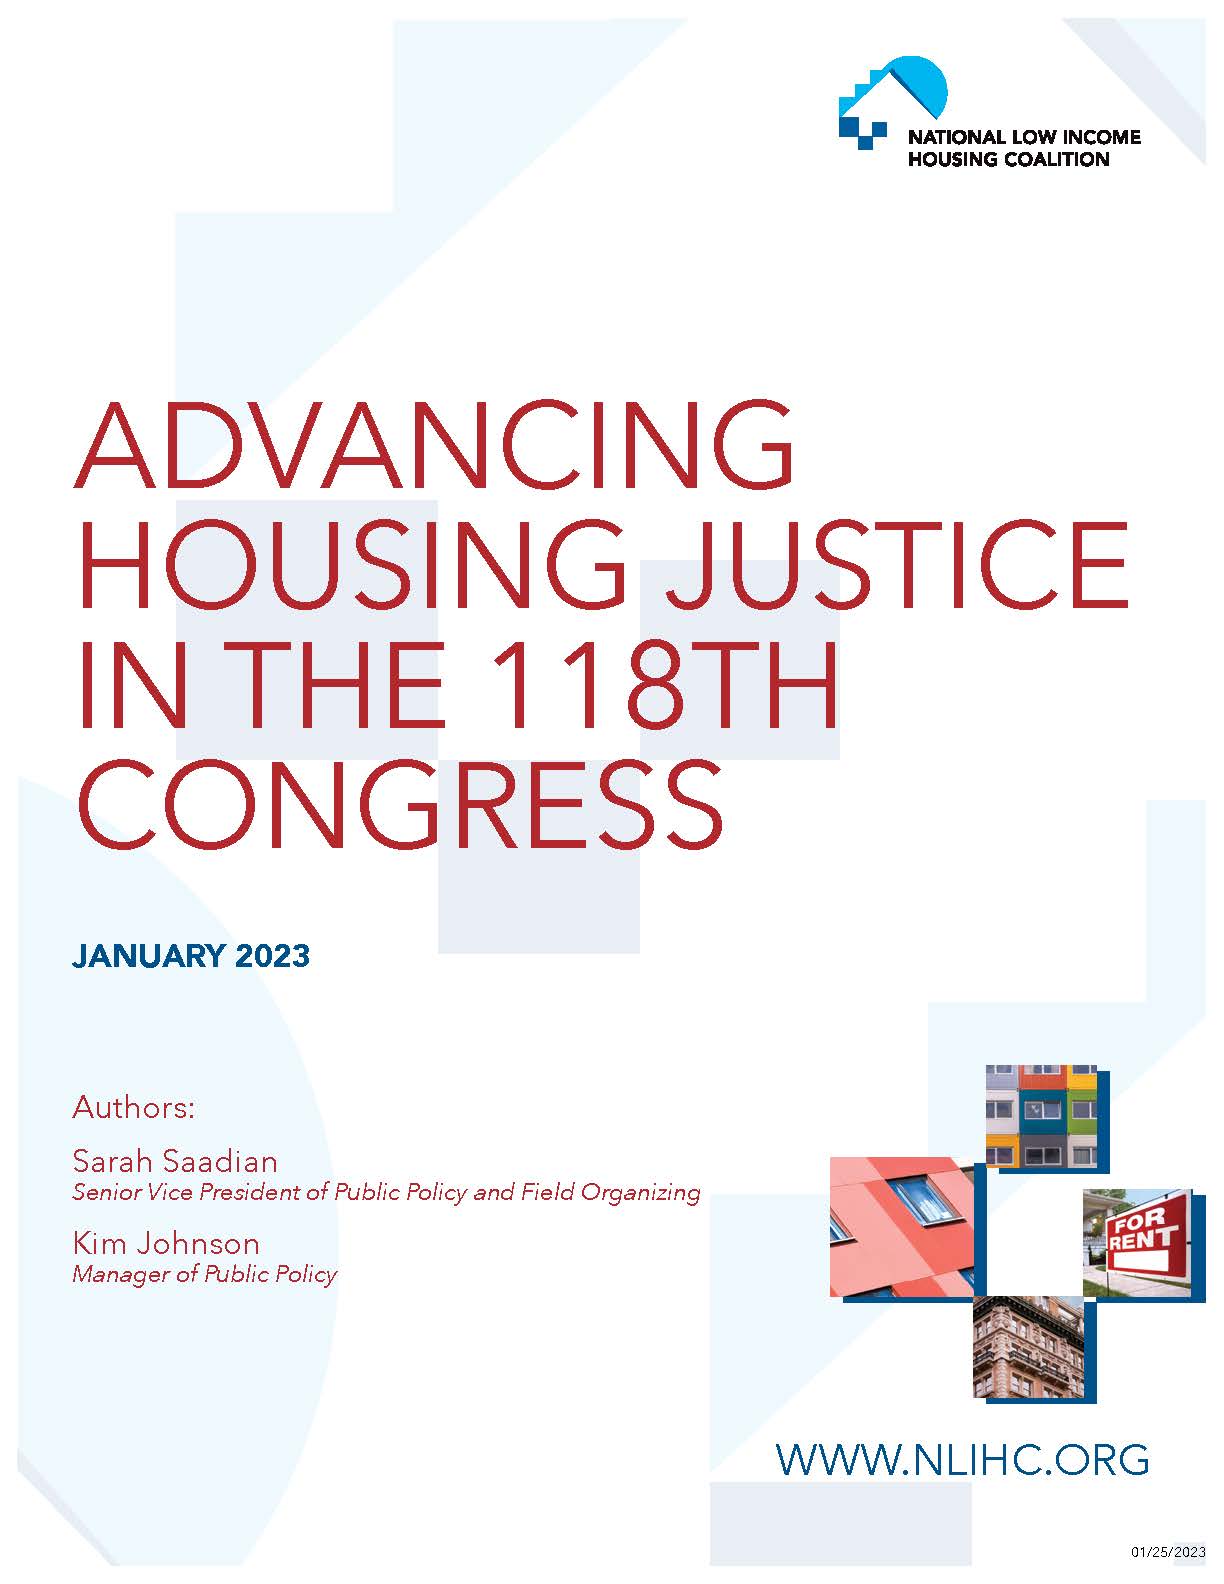 Advancing Housing Justice in the 118th Congress